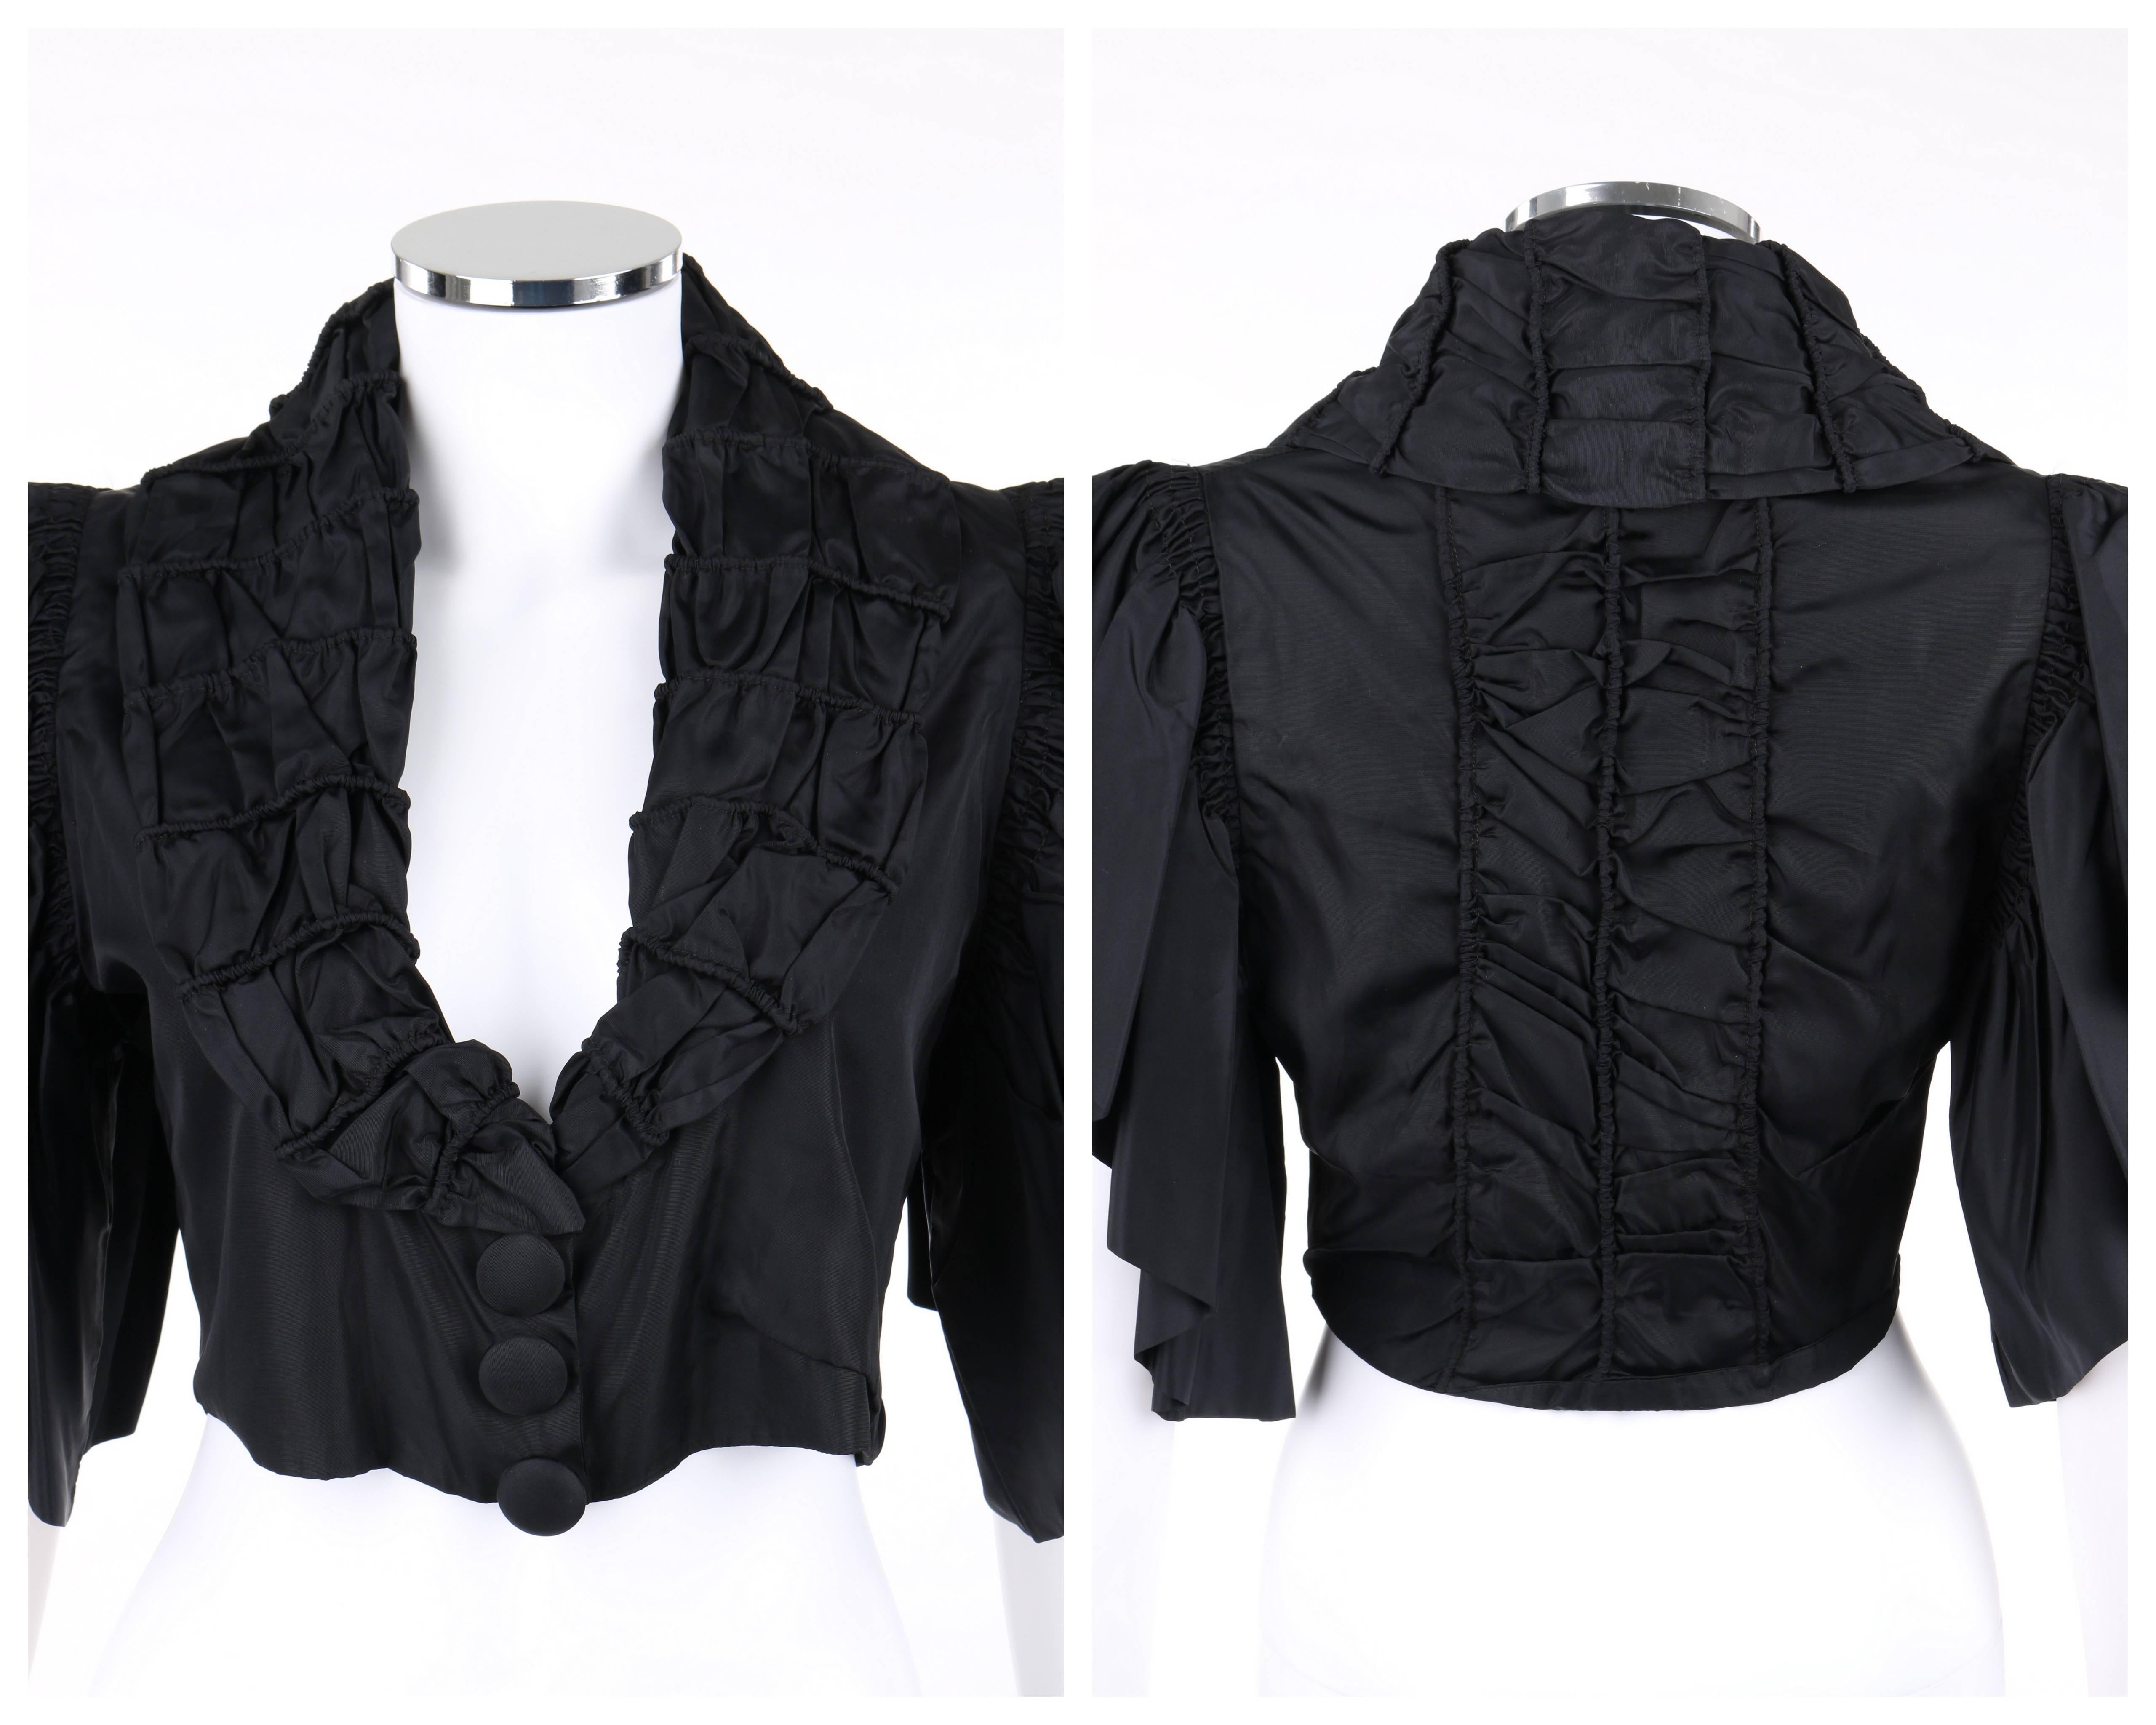 JEAN PATOU Adaptation c.1930's Black Silk Jacket Ruffled Capelet  In Good Condition For Sale In Thiensville, WI